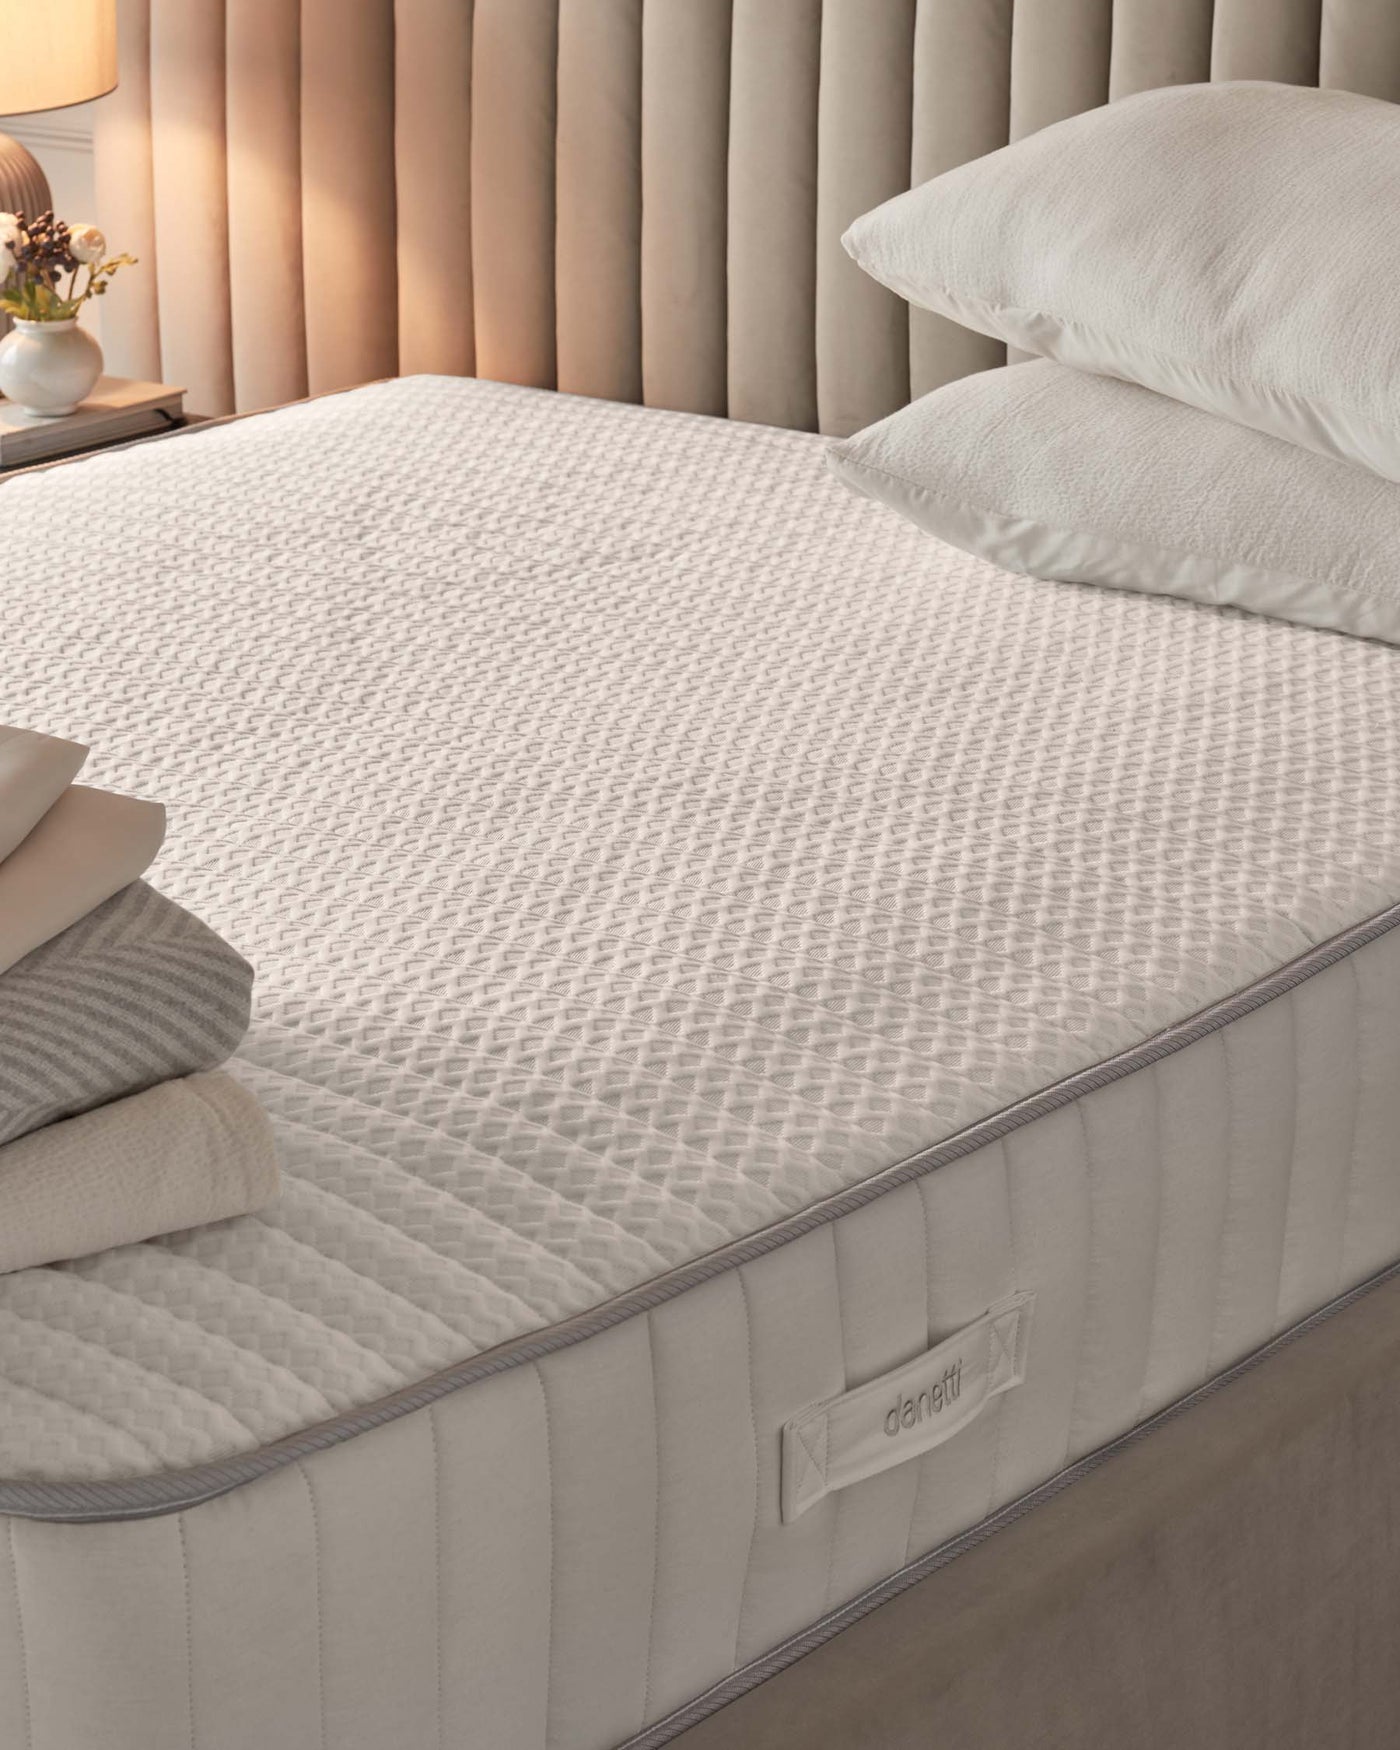 Luxurious queen-sized mattress with white quilted design and plush pillow-top. A pair of soft pillows with plain white covers are on top. Brand label visible on the mattress side. Elegant bedside with a neutral-toned lamp and flowers, set against a textured beige curtain backdrop.